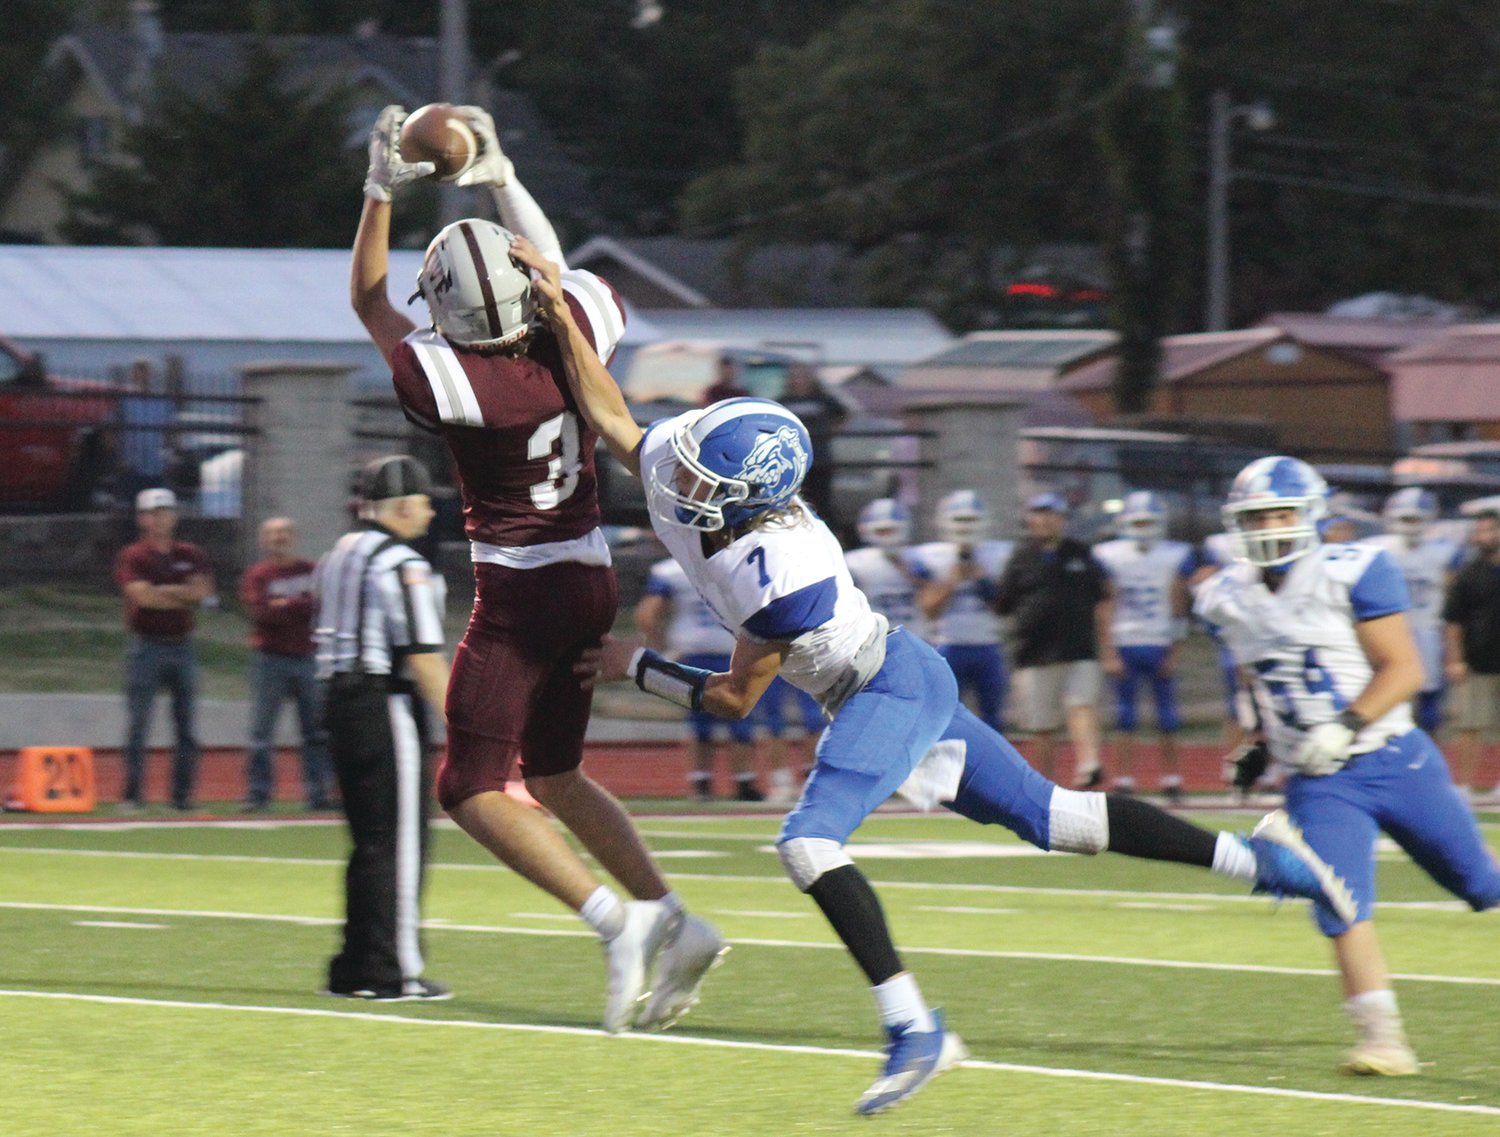 Mountain Grove’s Drew Vaughan hauls in a pass from quarterback Tyson Elliott for the game’s opening touchdown.